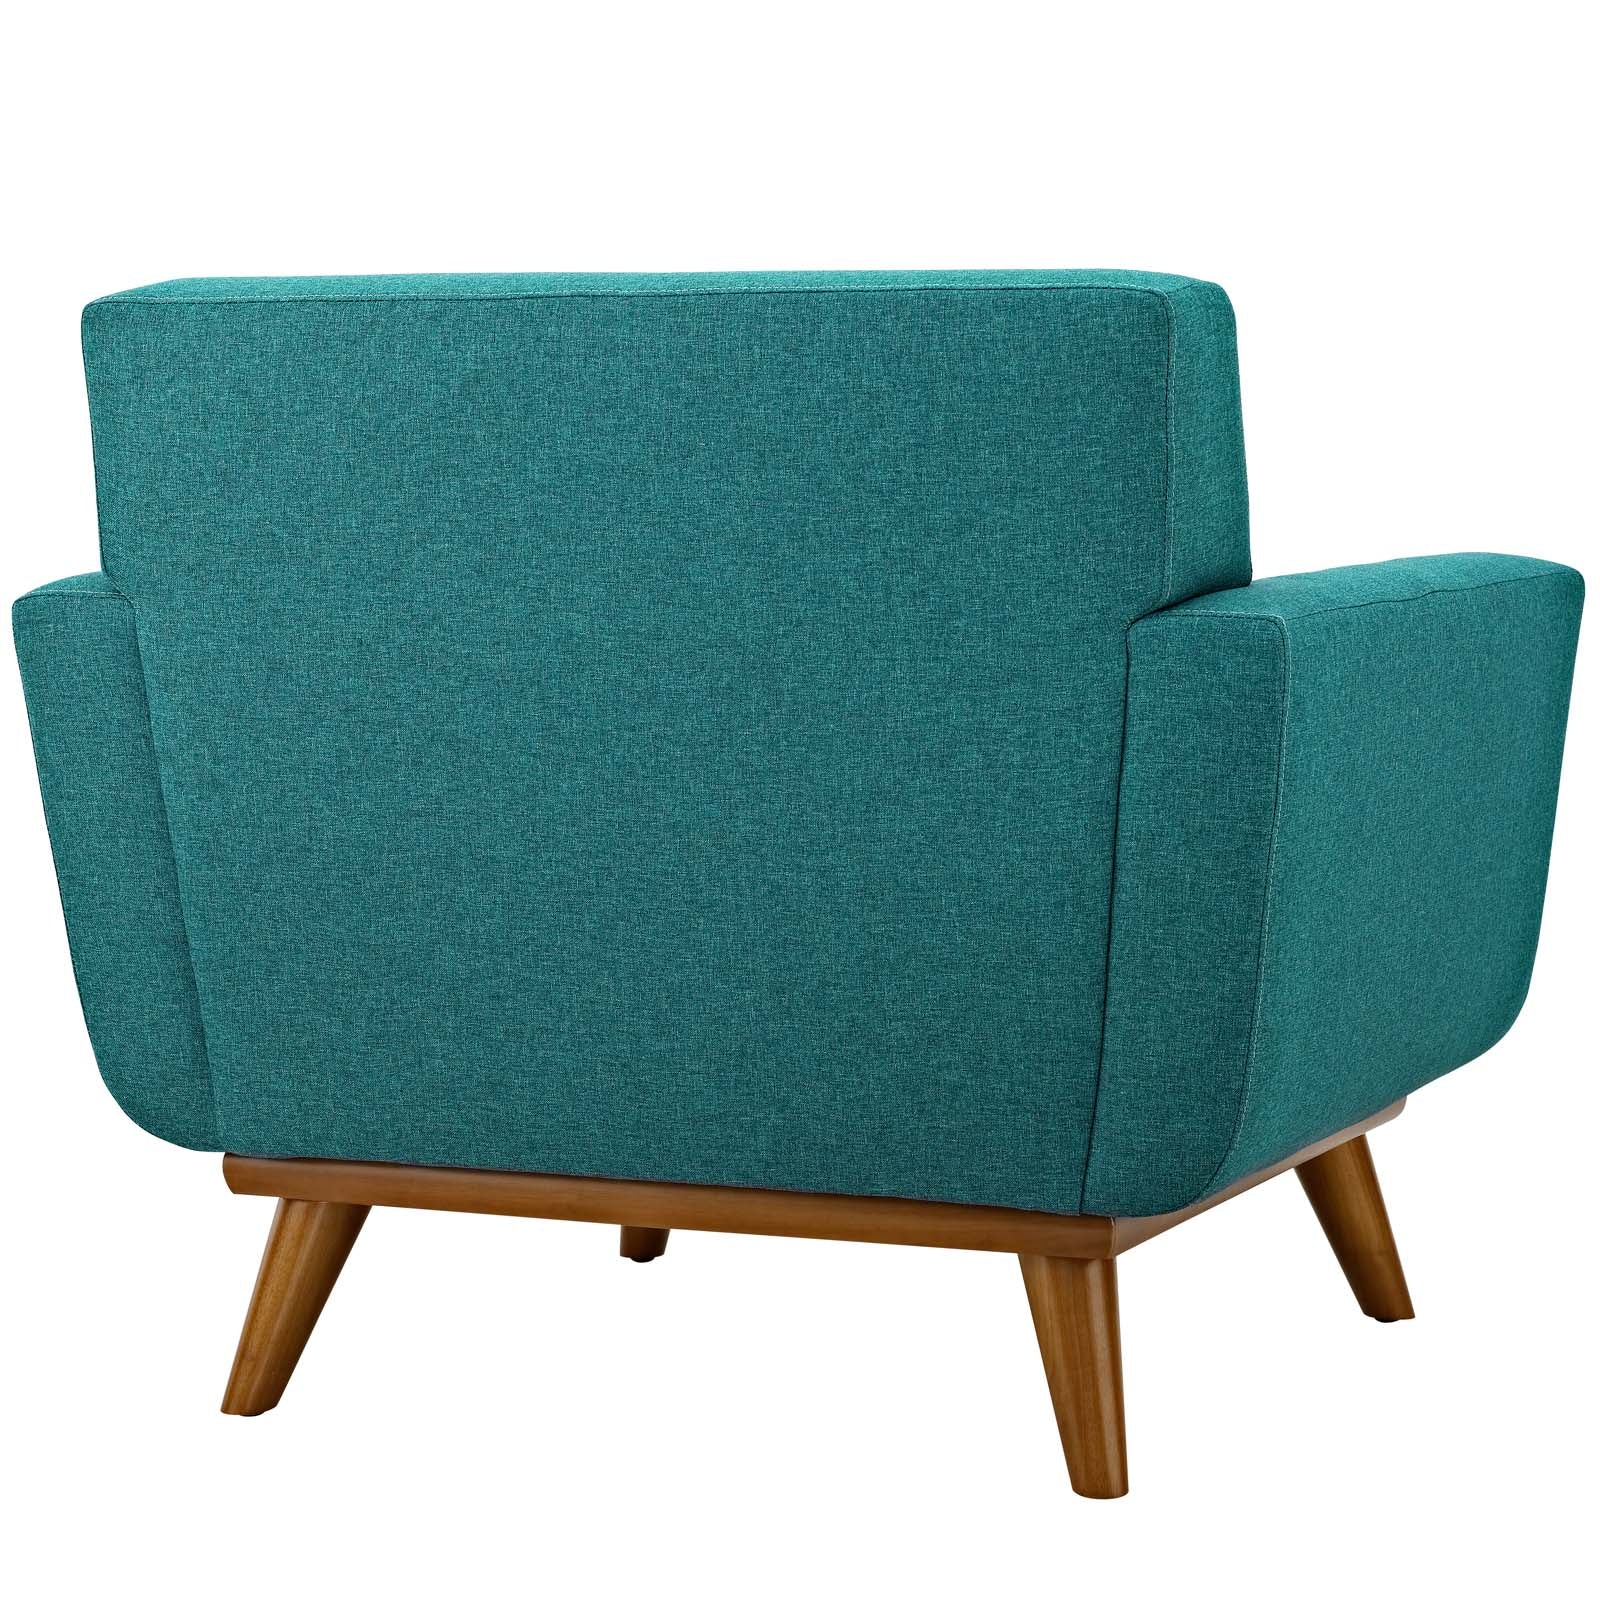 Modway Accent Chairs - Engage Upholstered Fabric Armchair Teal